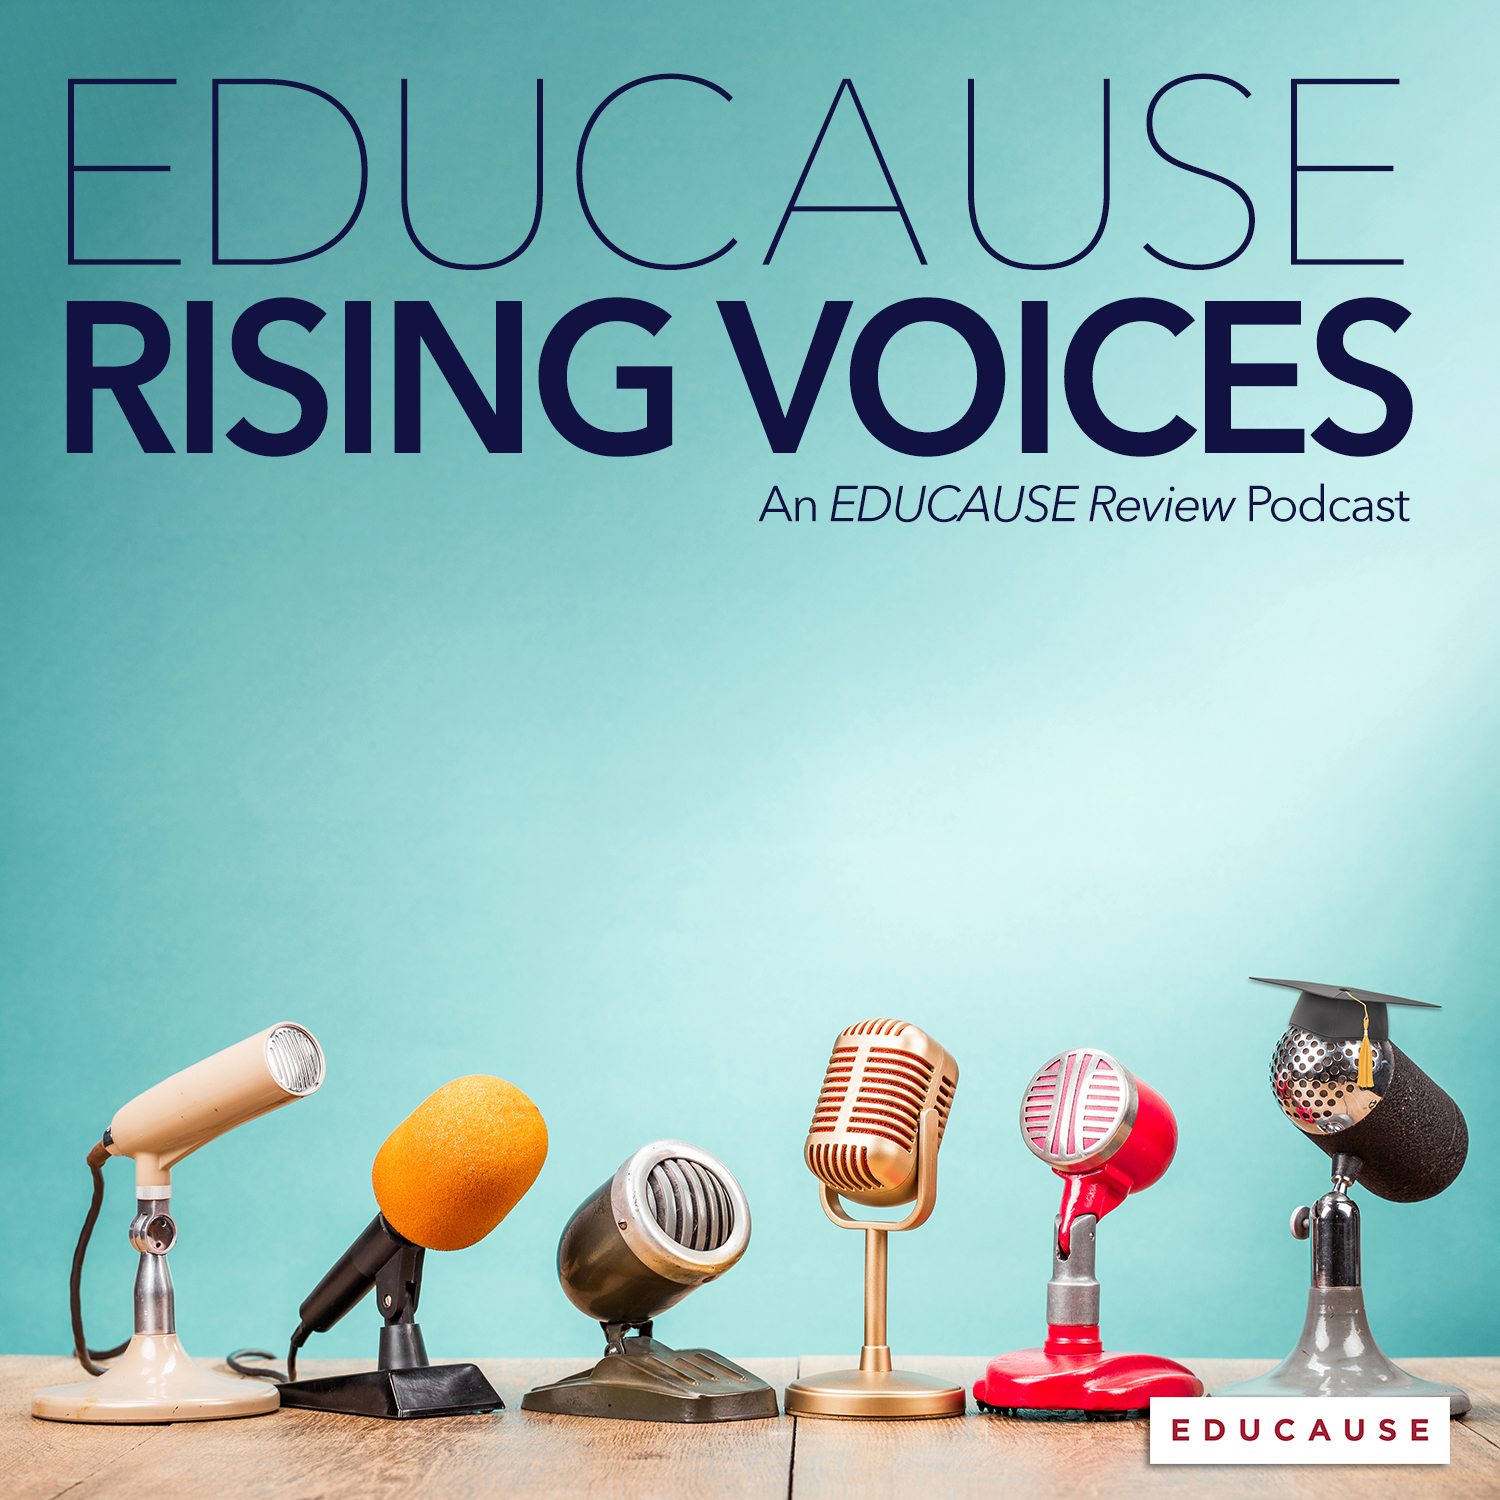 EDUCAUSE Rising Voices | An EDUCAUSE Review Podcast